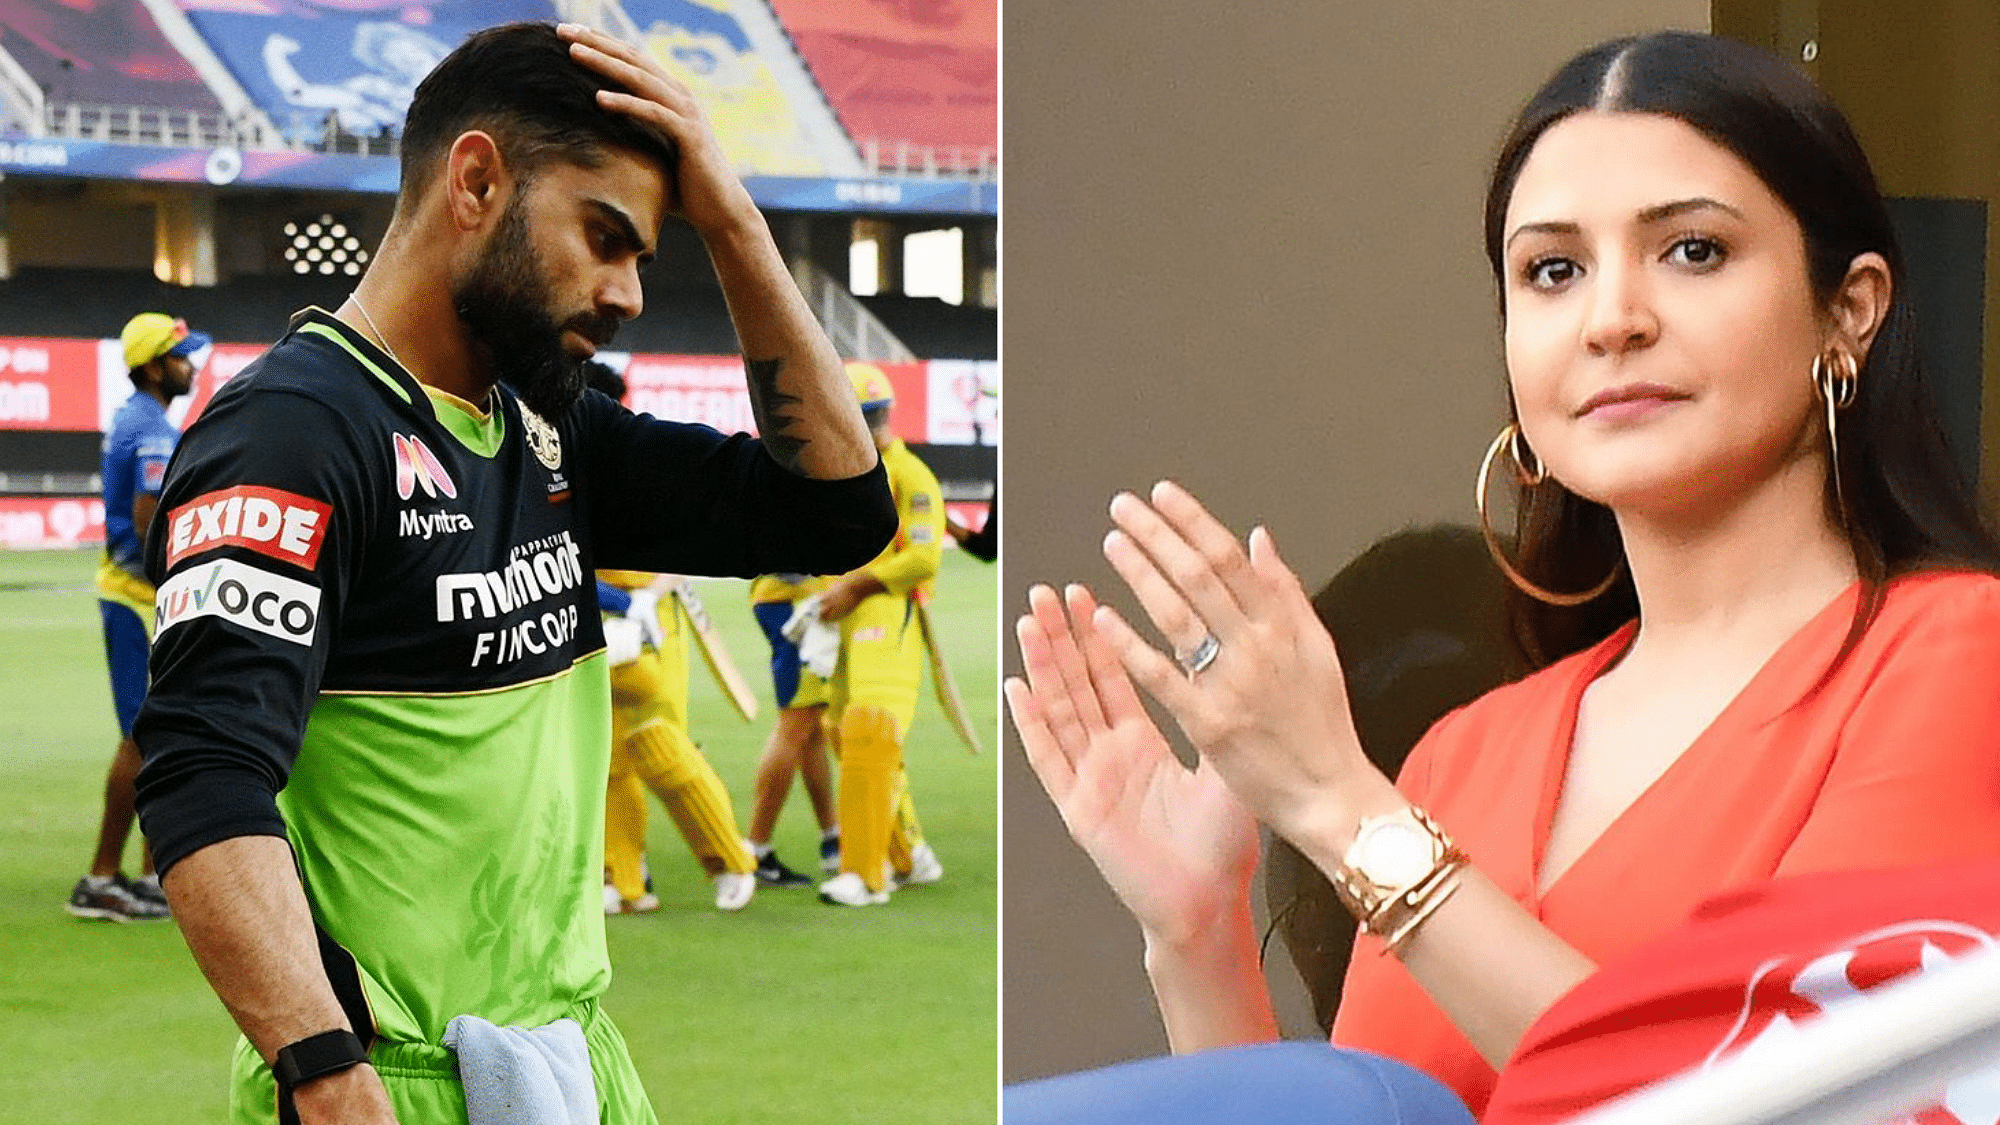 Virat Kohli’s conversation with Anushka Sharma is going viral online in which he asks her if she has eaten her food